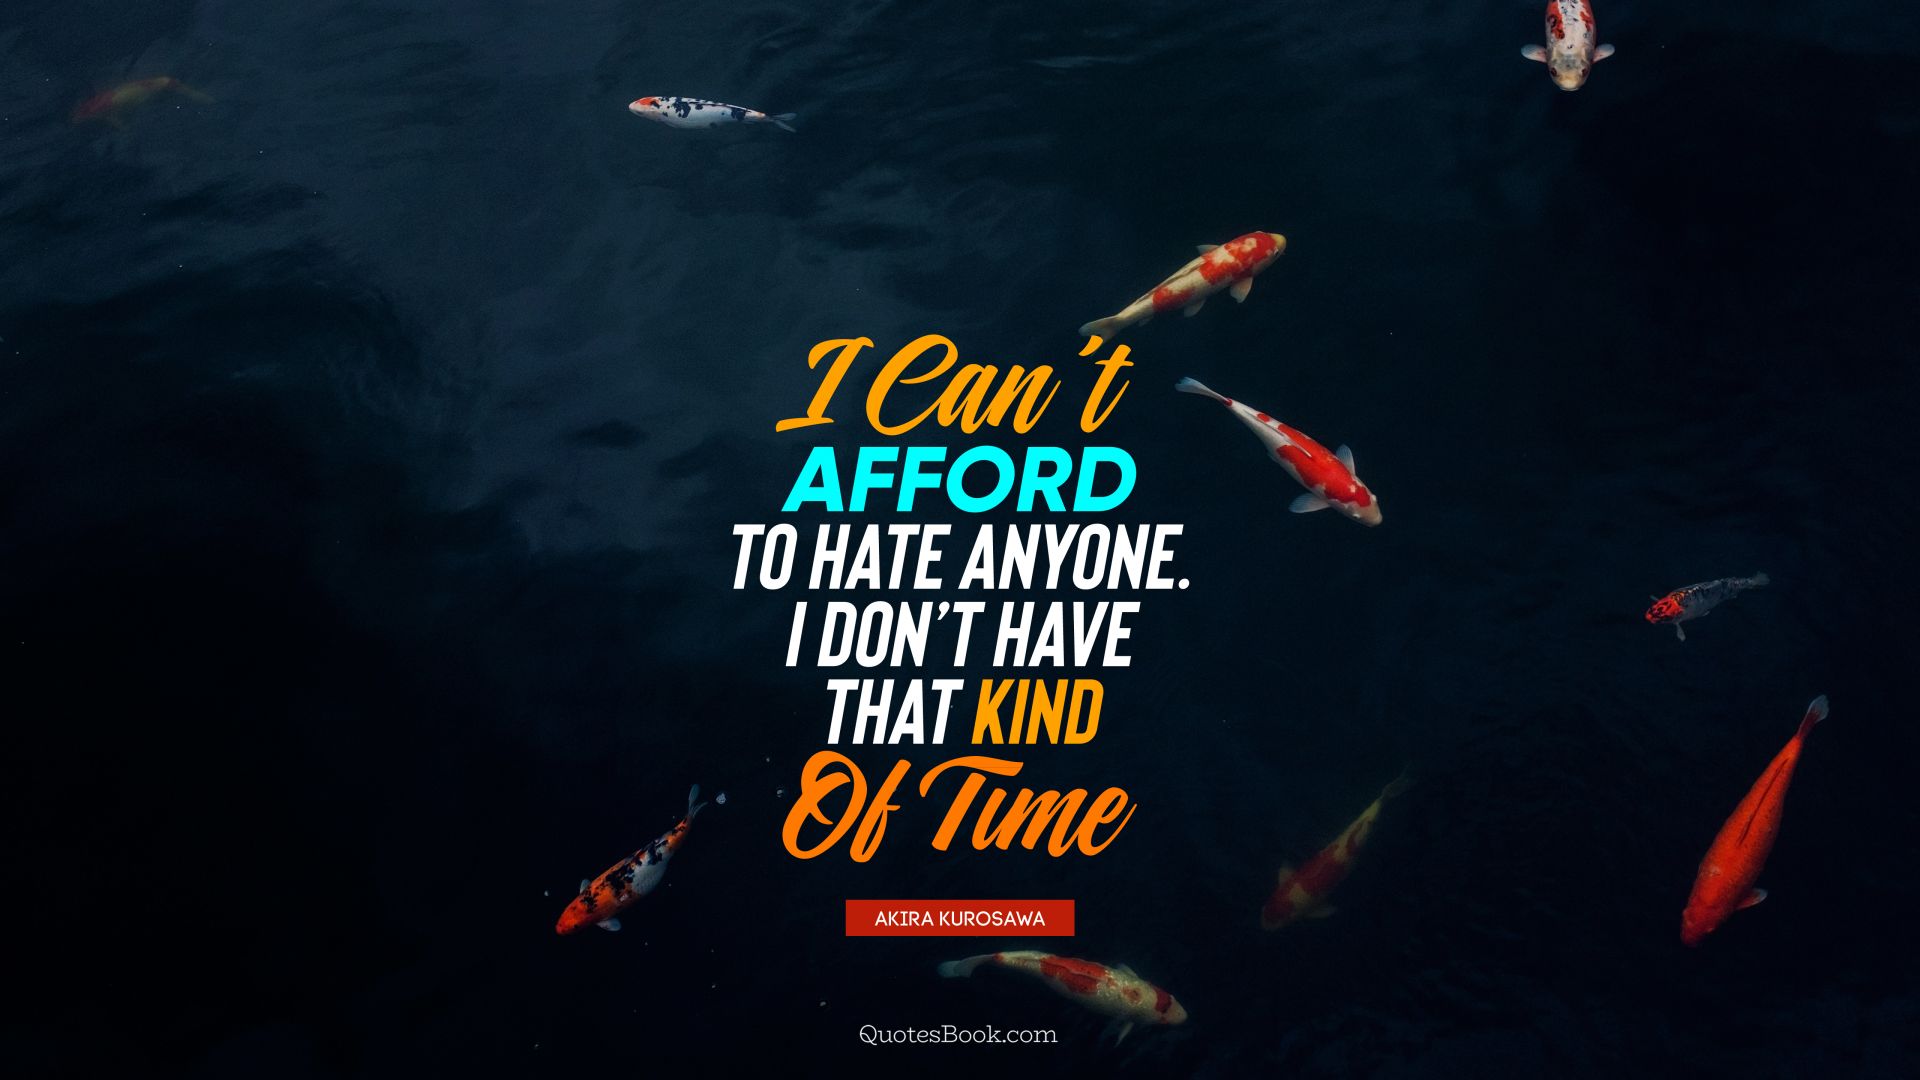 I can’t afford to hate anyone. I don’t have that kind of time. - Quote by Akira Kurosawa